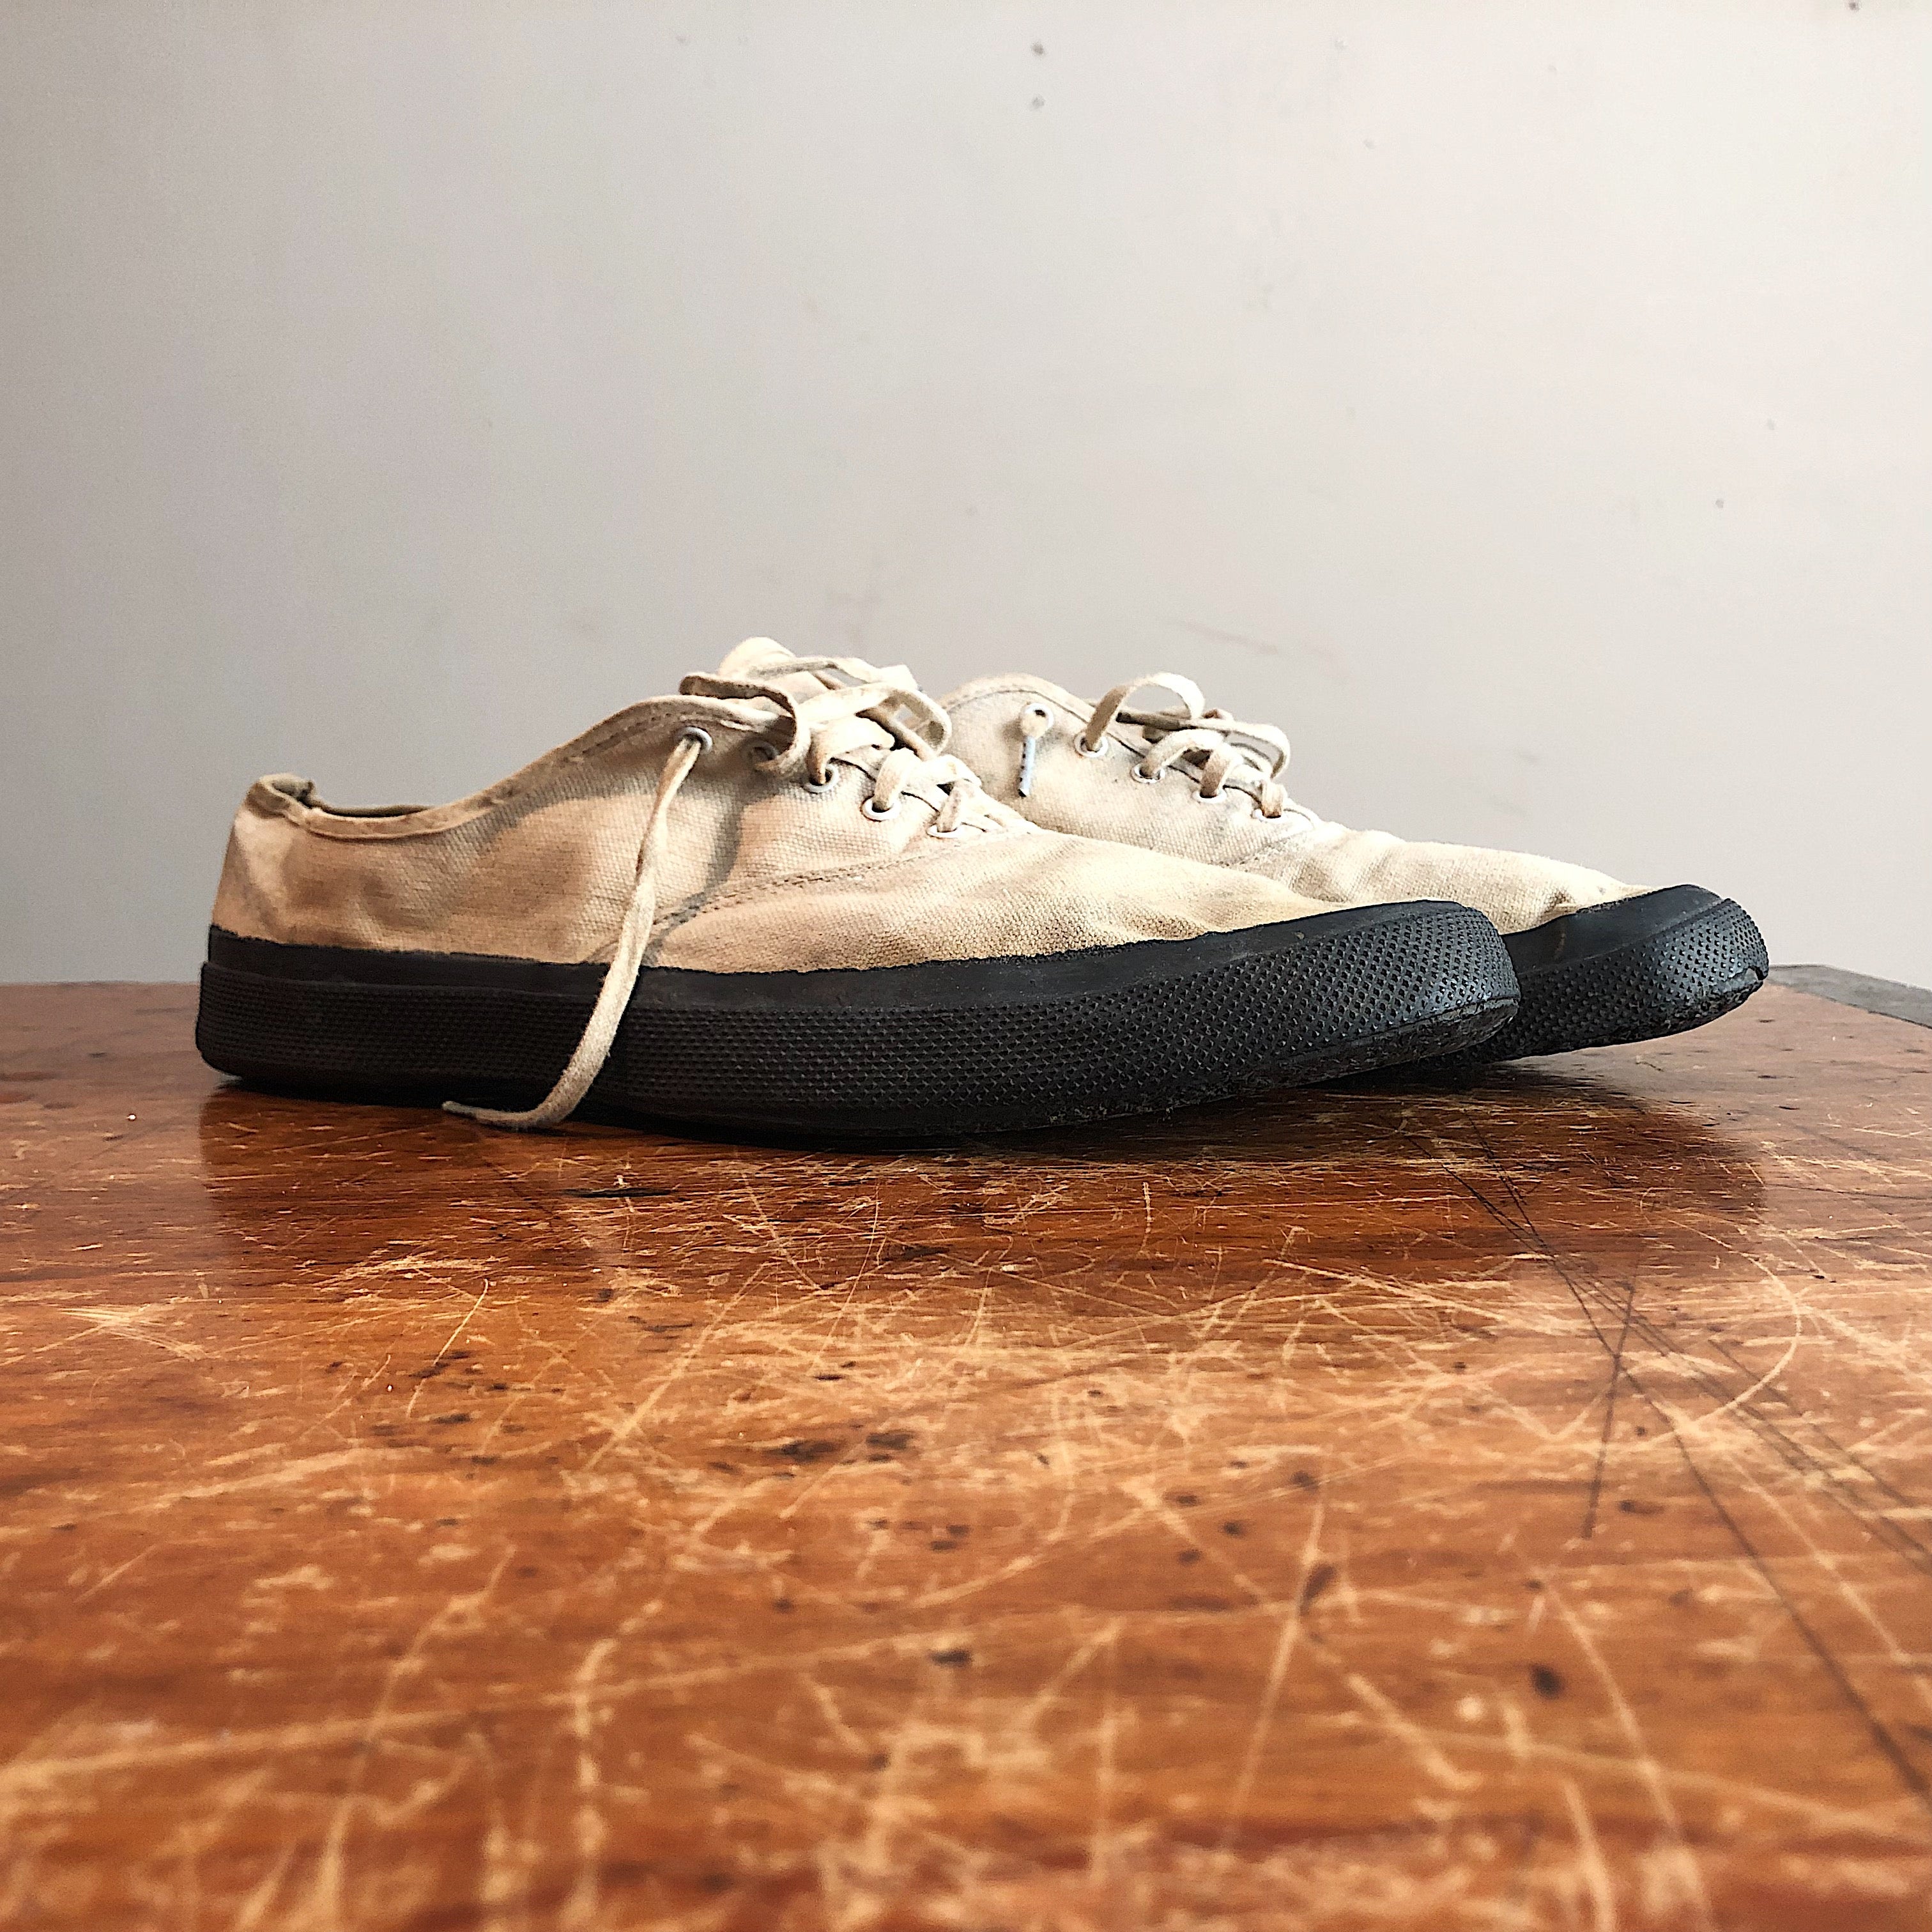 Rare WW2 Deck Shoes - United States Navy - 1940s - Size 11 1/2? - Canvas Sneakers - World War 2 Militaria Collectibles 